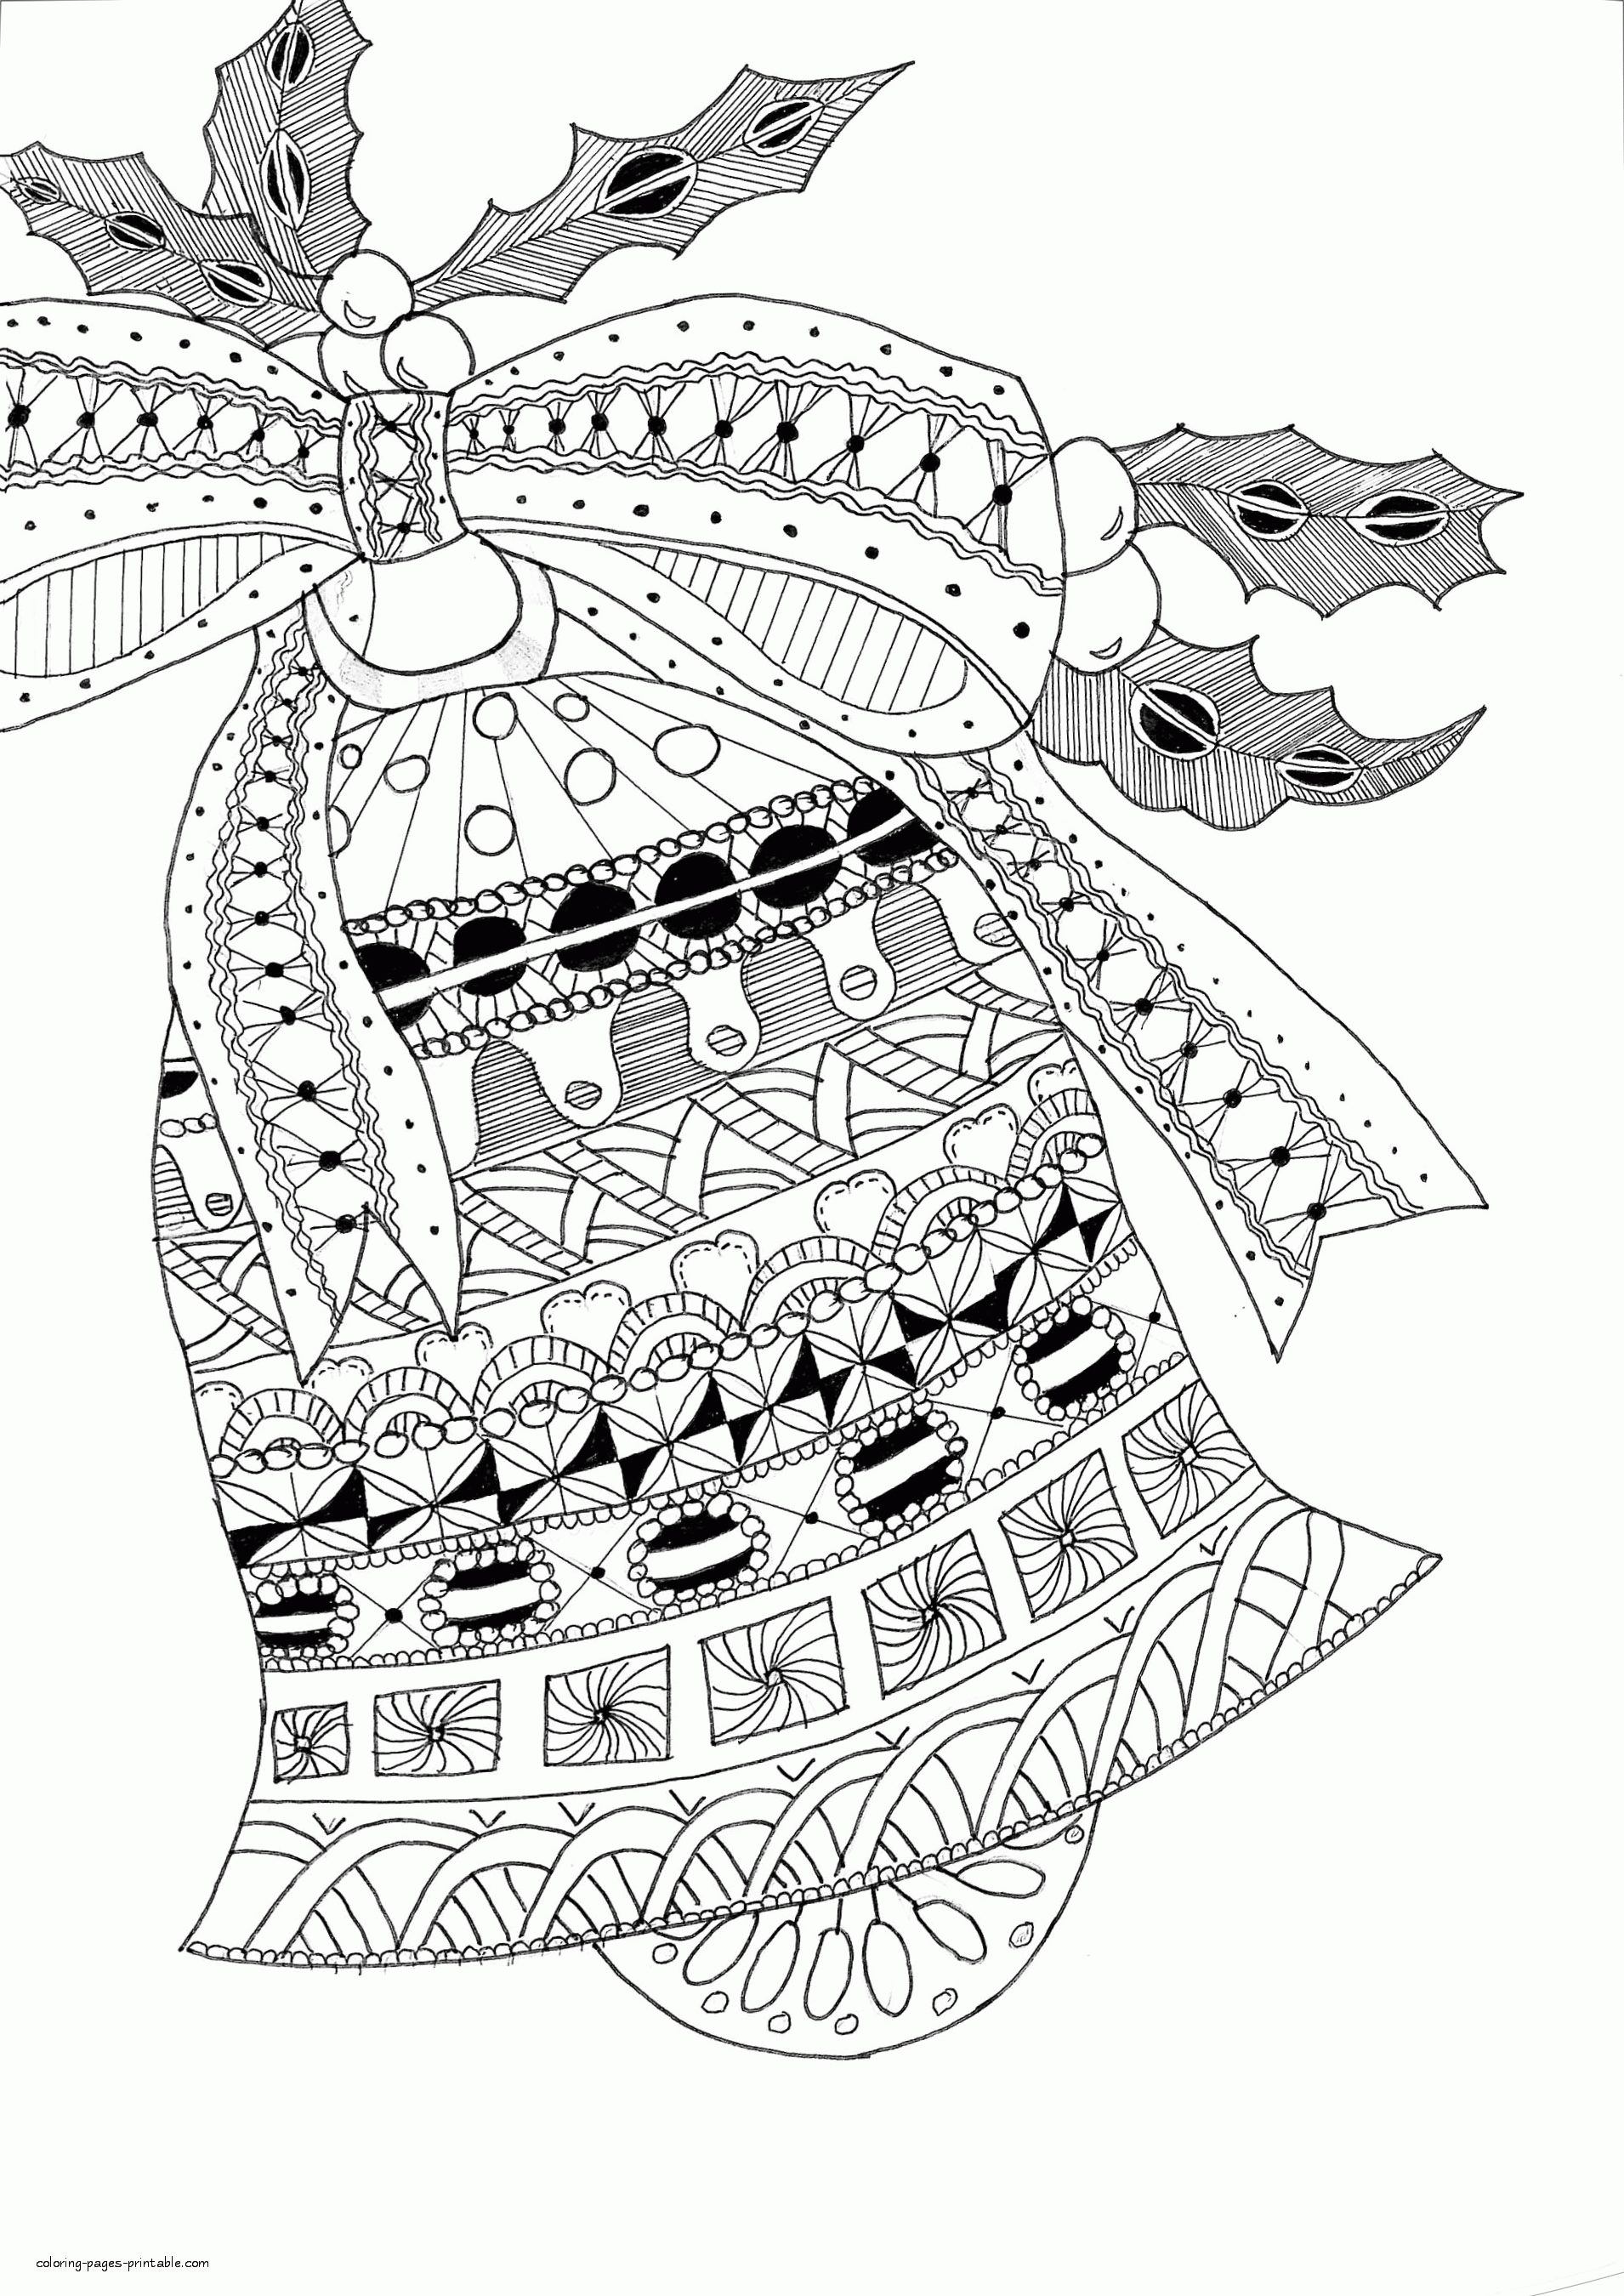 Zentangle Coloring Pages. The Christmas Bell    COLORING PAGES ...